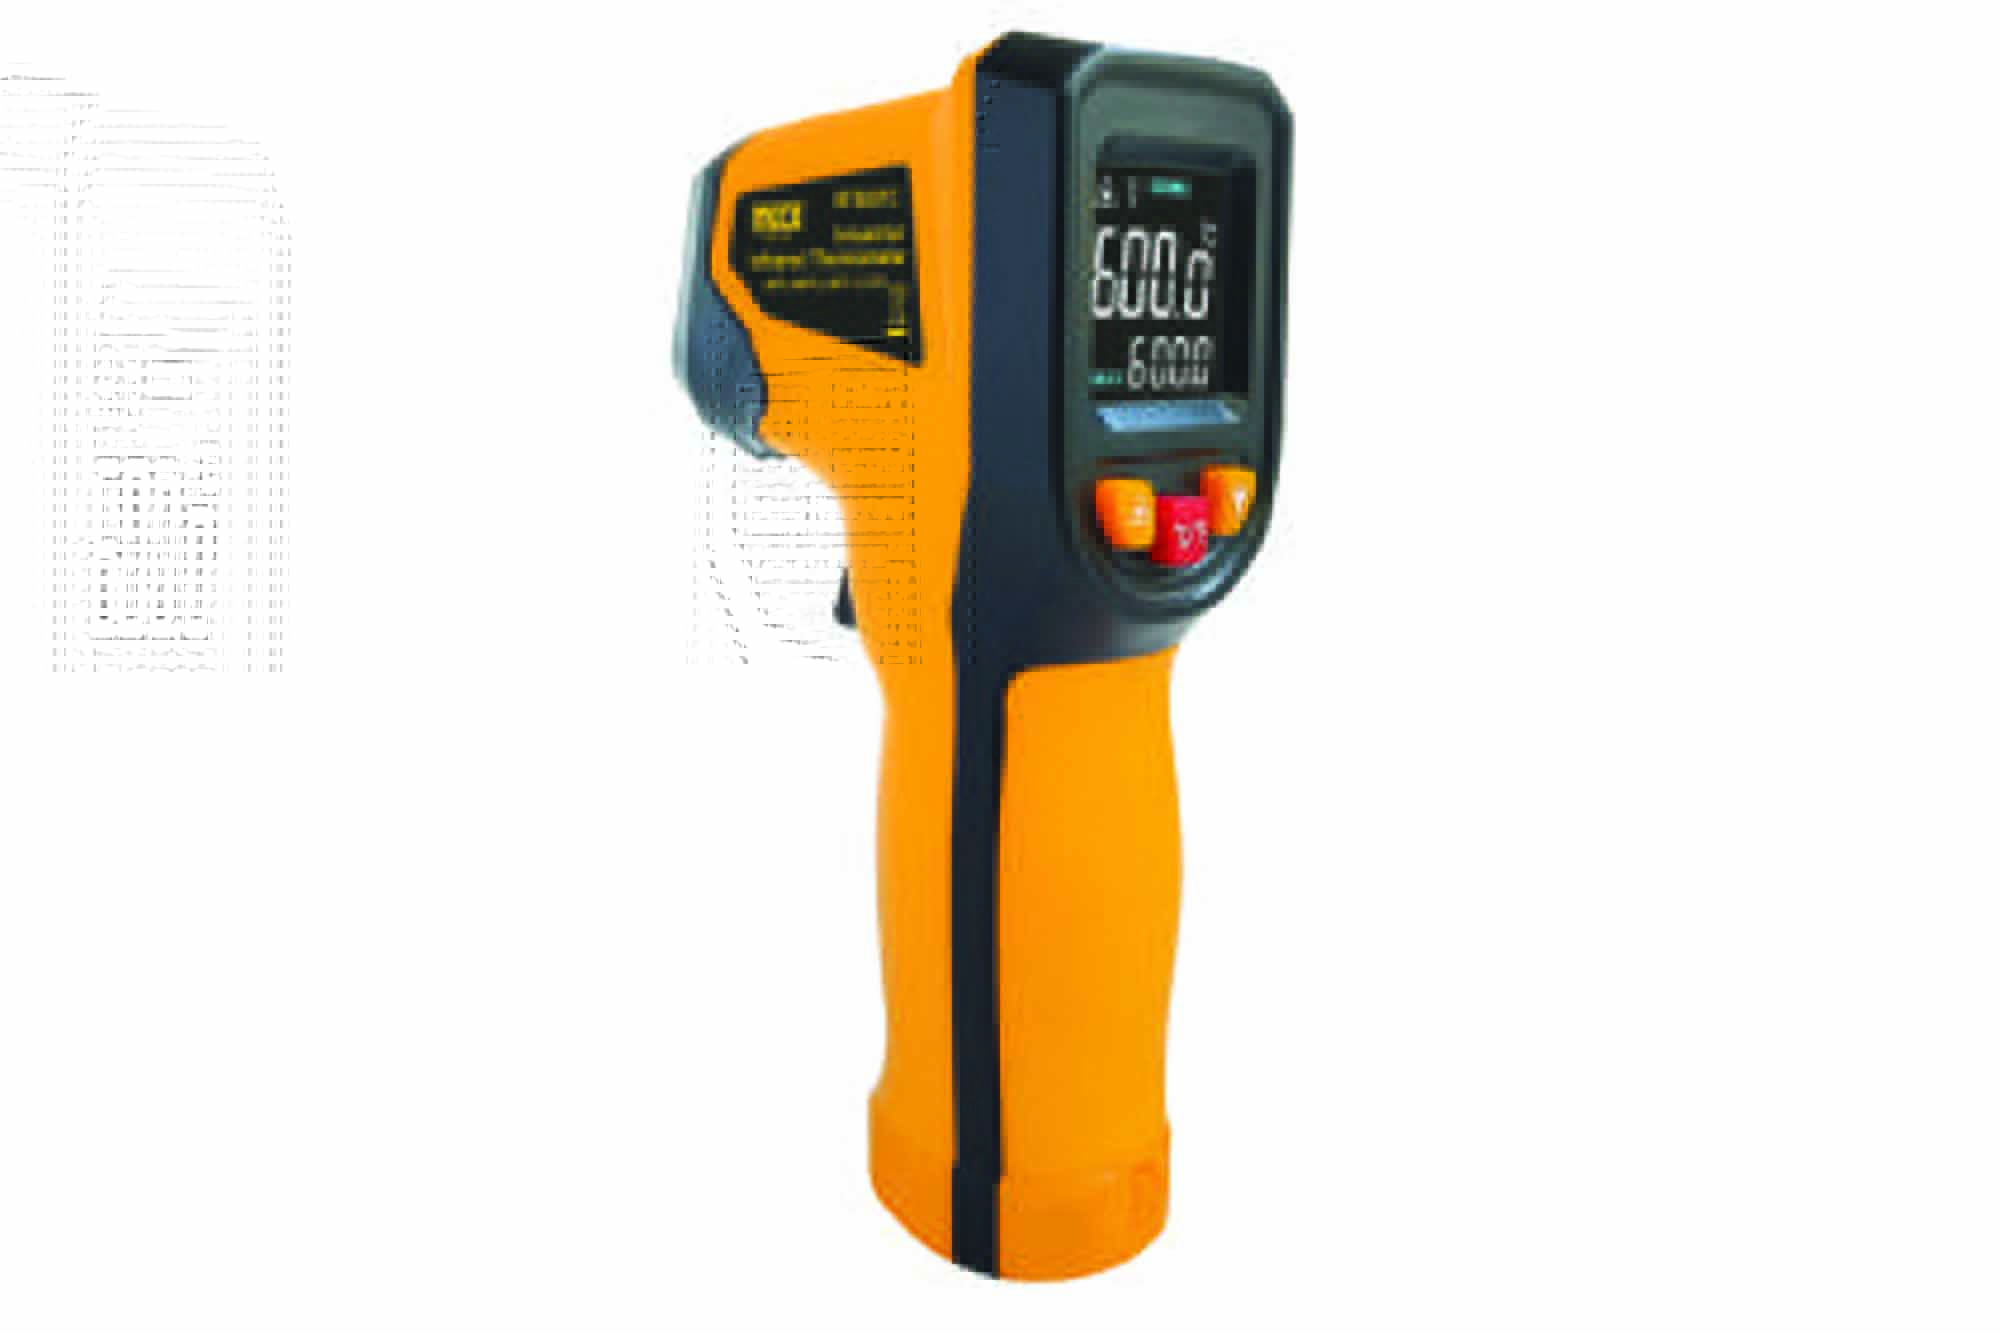 MECO unveils versatile IRT600TC industrial infrared thermometer